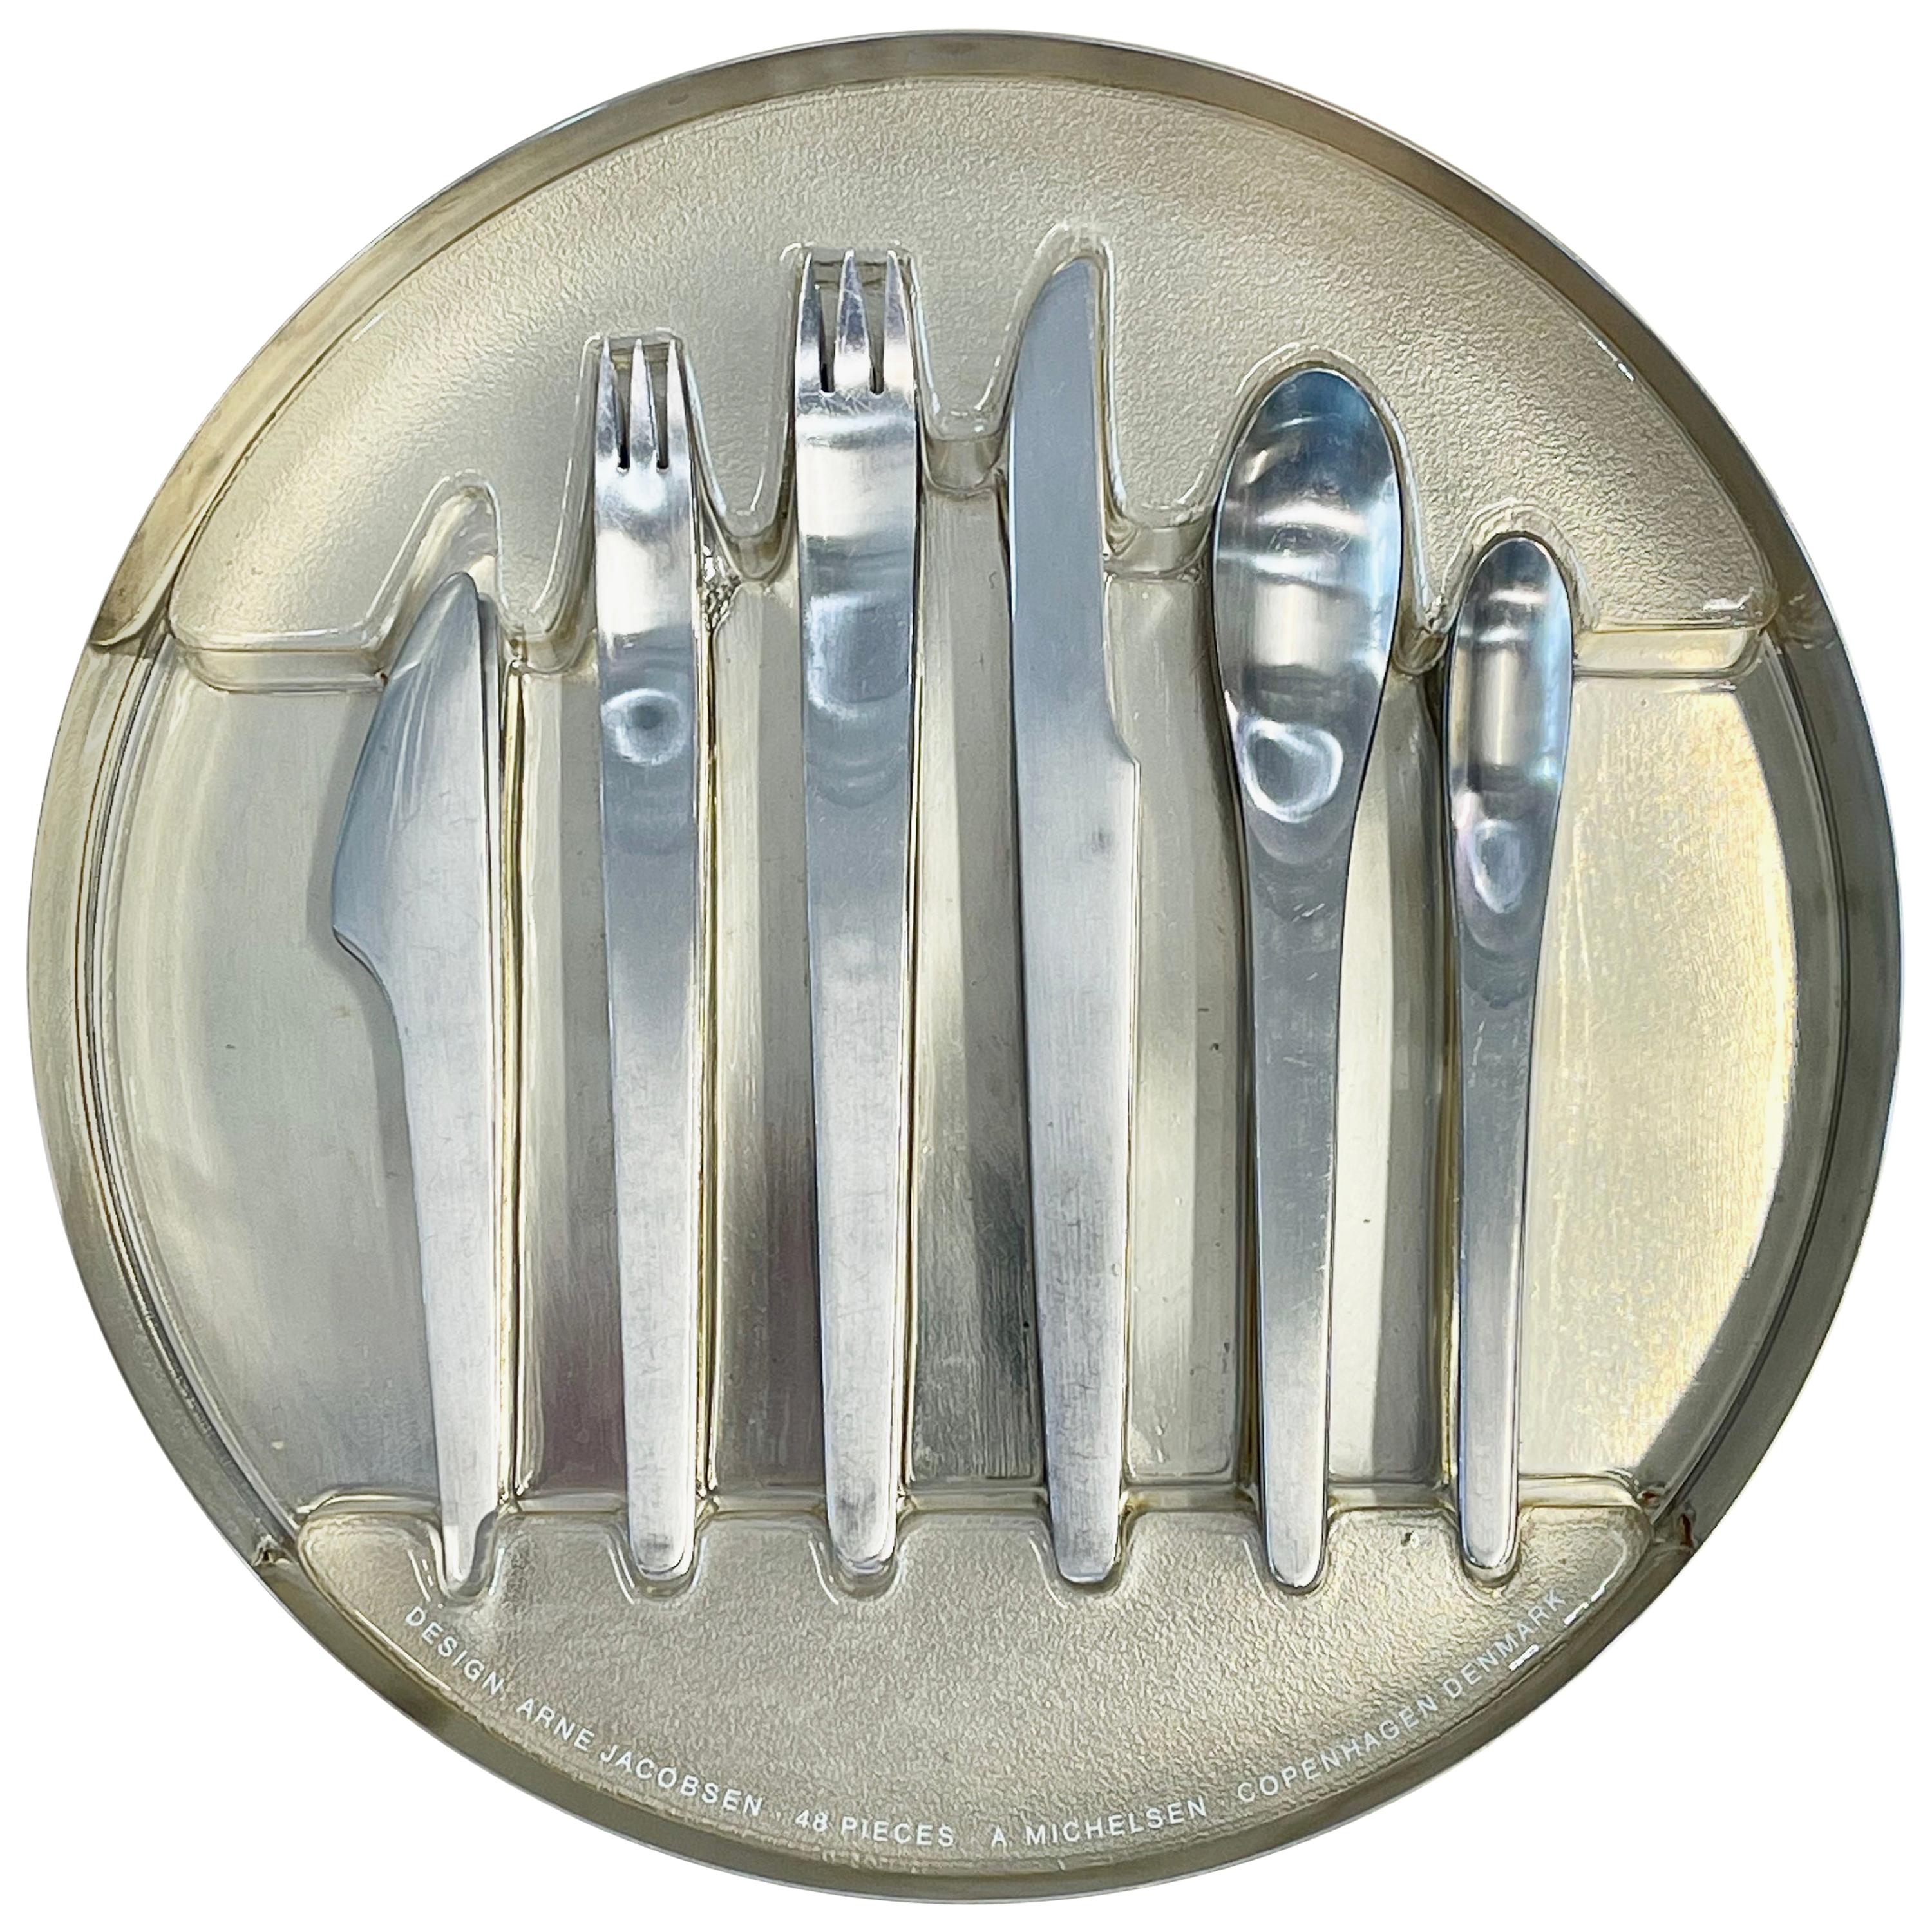 Arne Jacobsen 'AJ' six-piece flatware set for eight, 1970s. 
Stainless steel. Manufactured by A. Michelsen, by appointment to The King of Denmark , since 1957. Each piece impressed with maker's mark. 
In its original stainless steel round box with